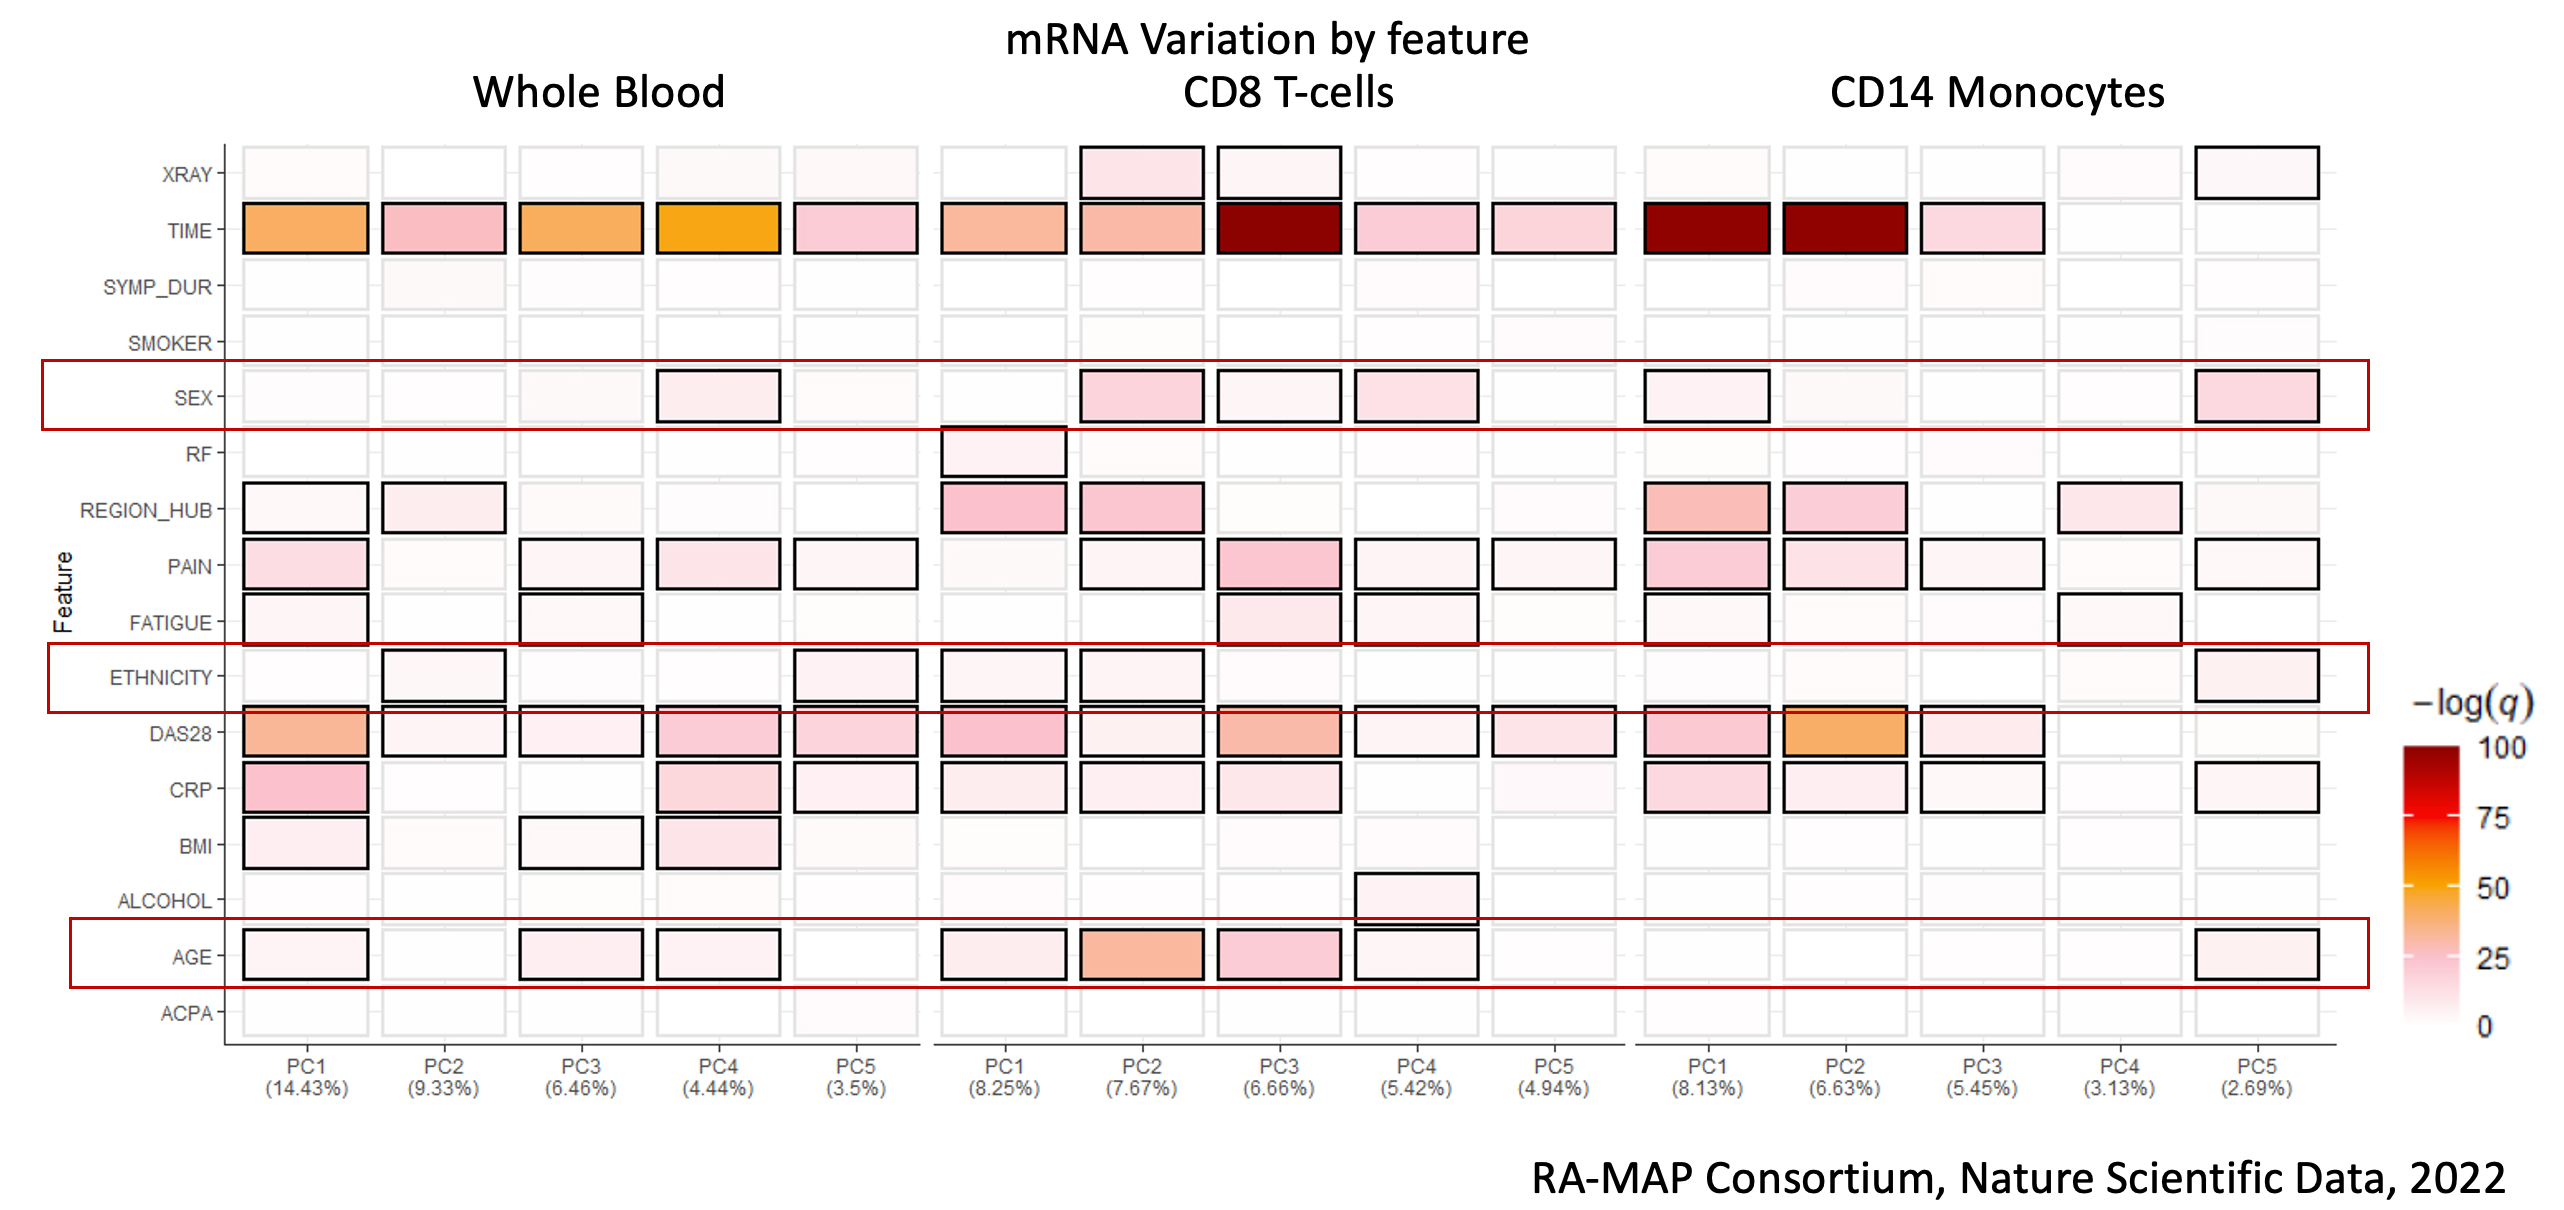 Image of Unsupervised PCA Driver analysis of mRNA for whole blood, CD8 T-cells and CD14 Monocytes, showing that the clinical features Sex, Ethnicity and Age have some degree of association with principal components 1-5. . 